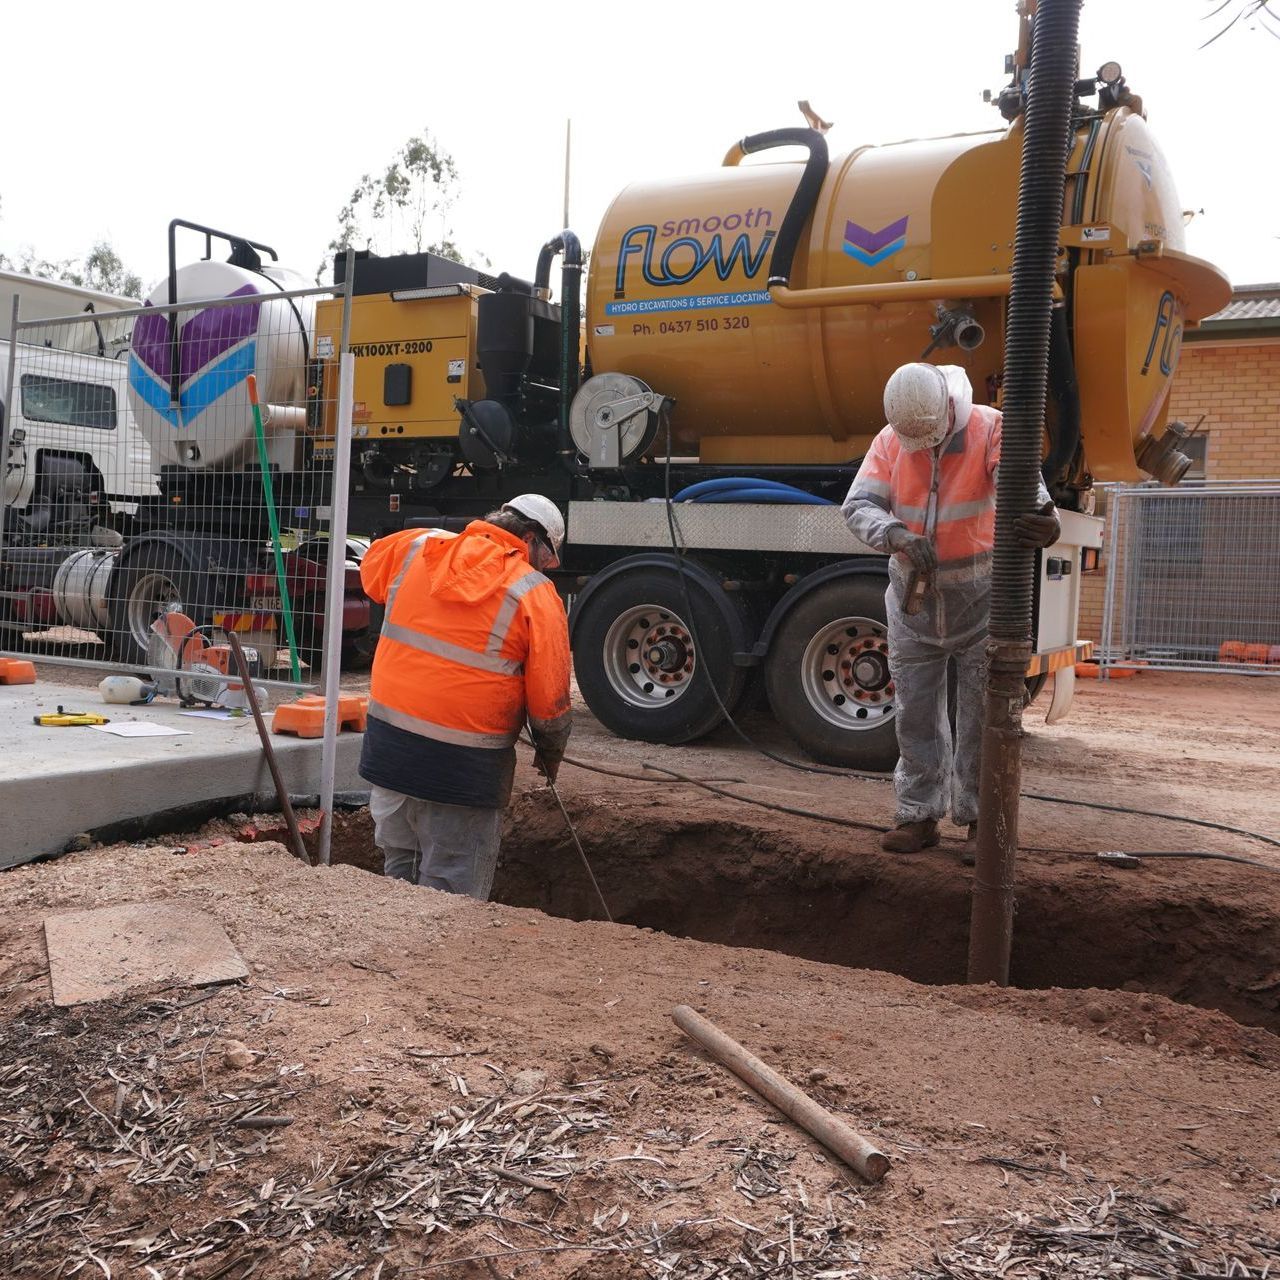 two men are digging a hole in front of a smooth flow truck